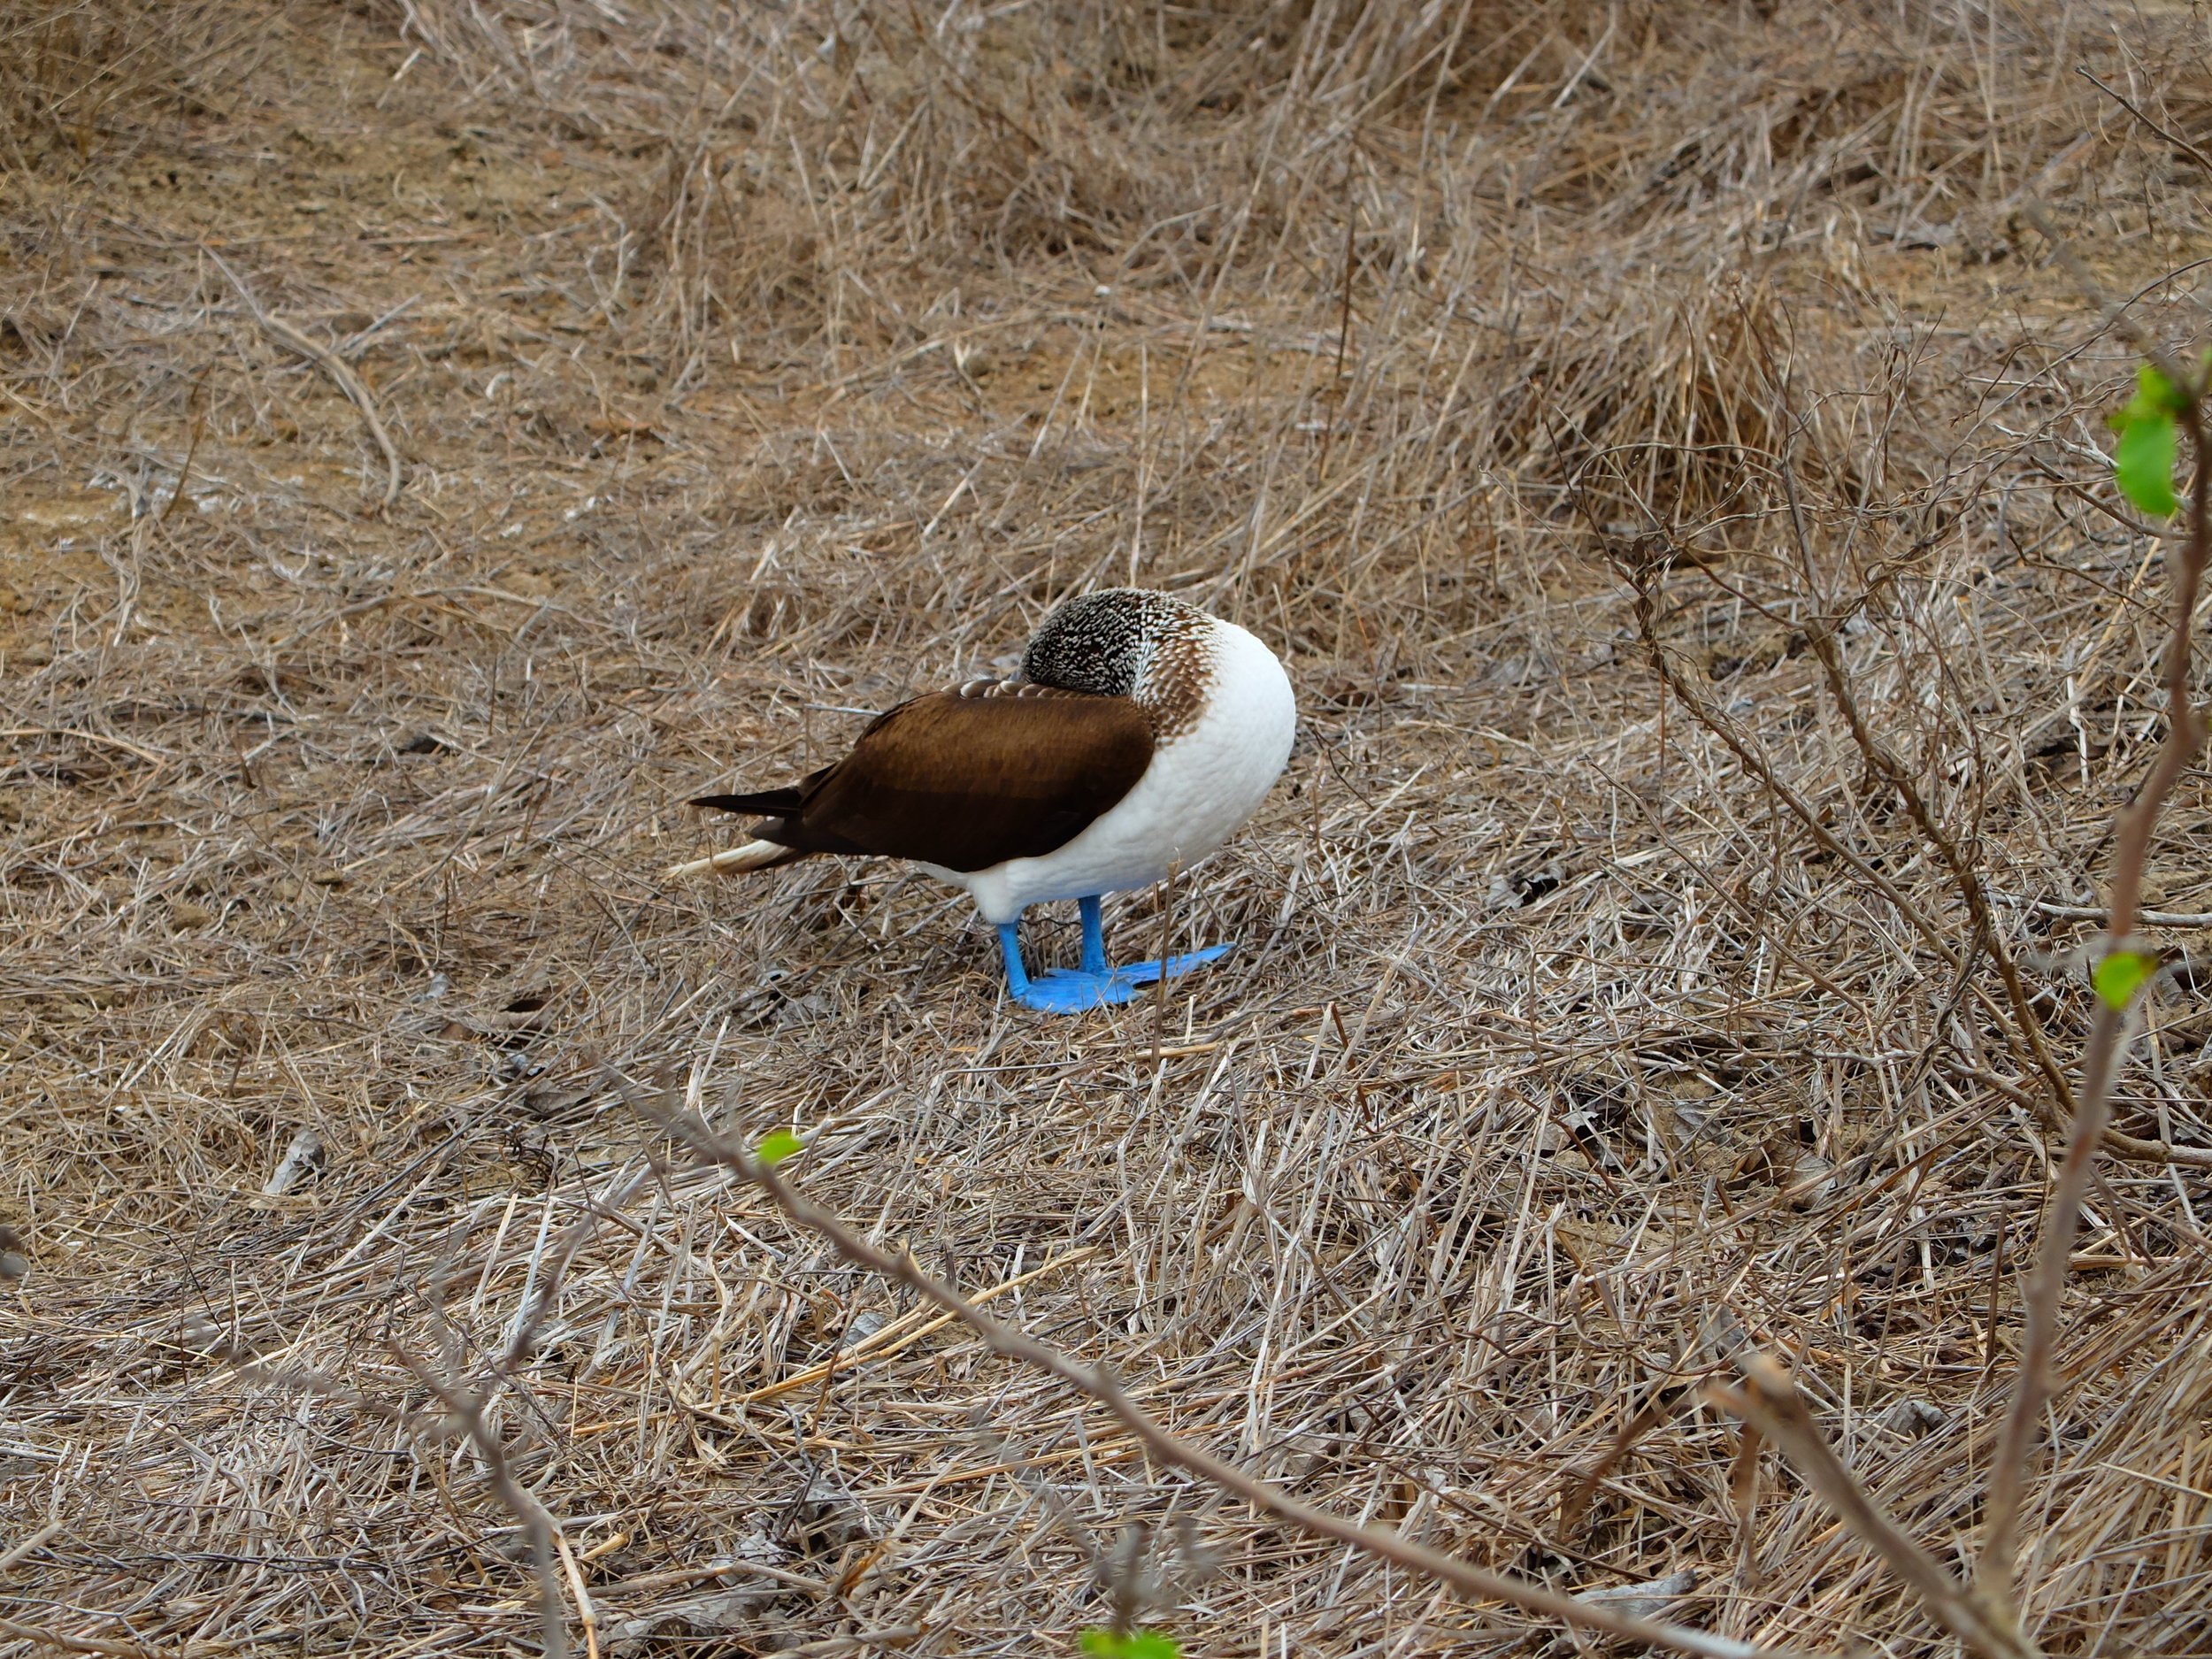 Blue-Footed Booby - Who Dreams Up These Names? • Travel Tales of Life